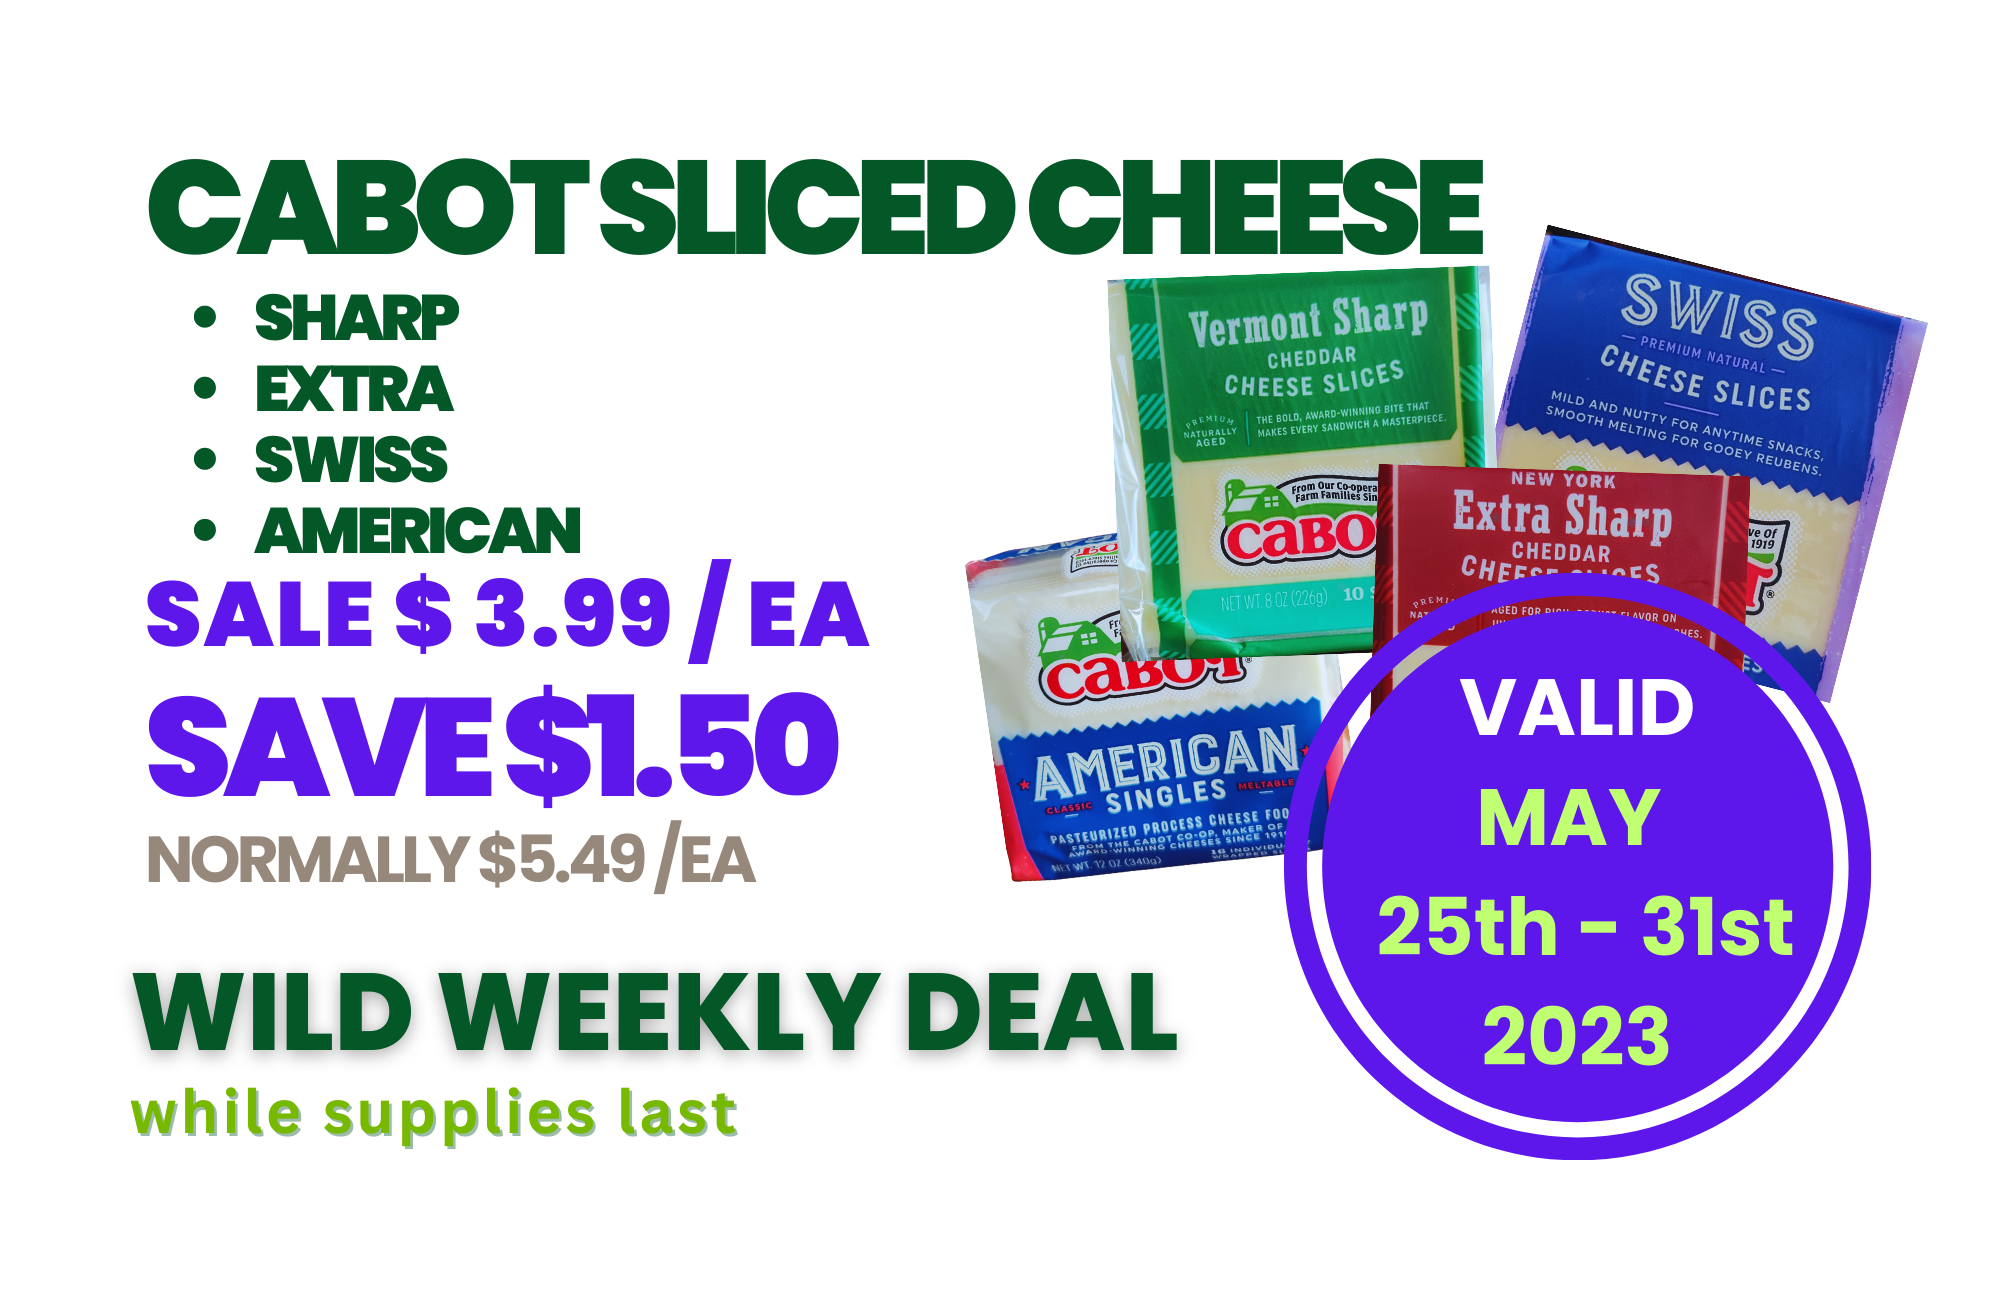 2023-0525-0531 Wild Weekend Deal Cabot Sliced Cheese.png